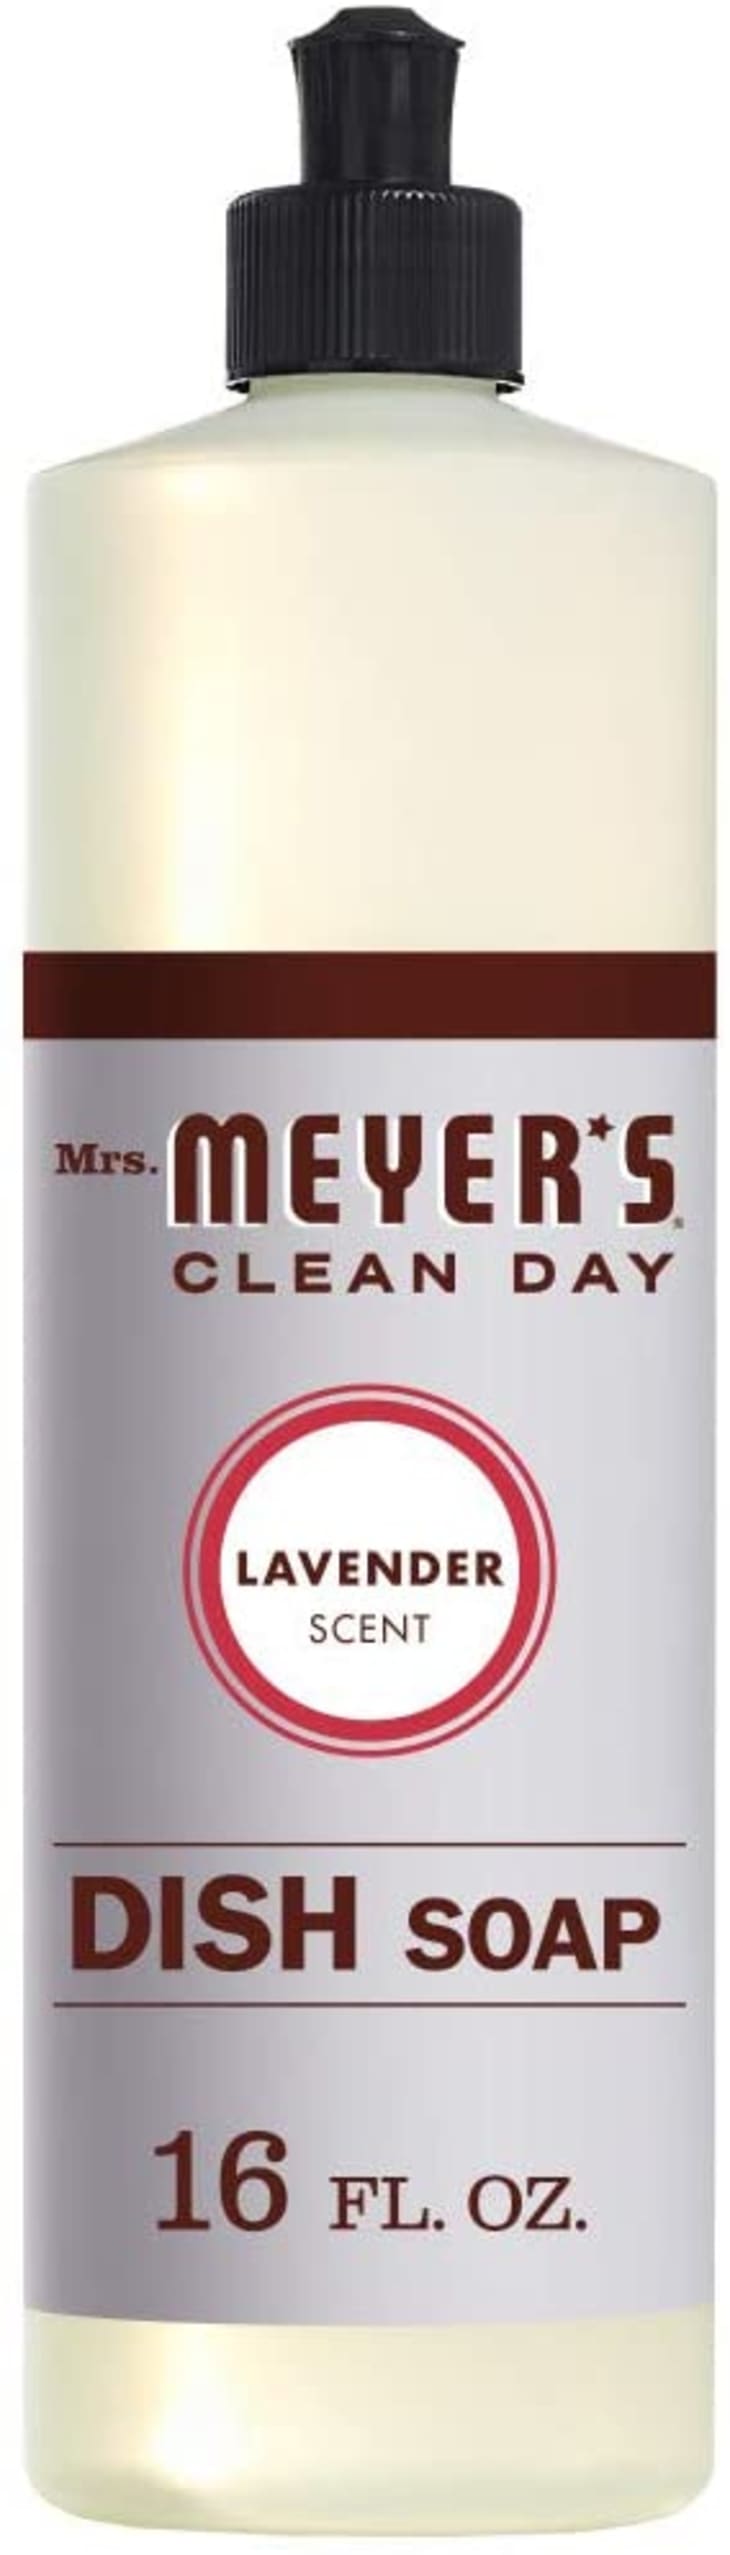 Product Image: Mrs. Meyer's Clean Day Liquid Dish Soap, Lavender Scent